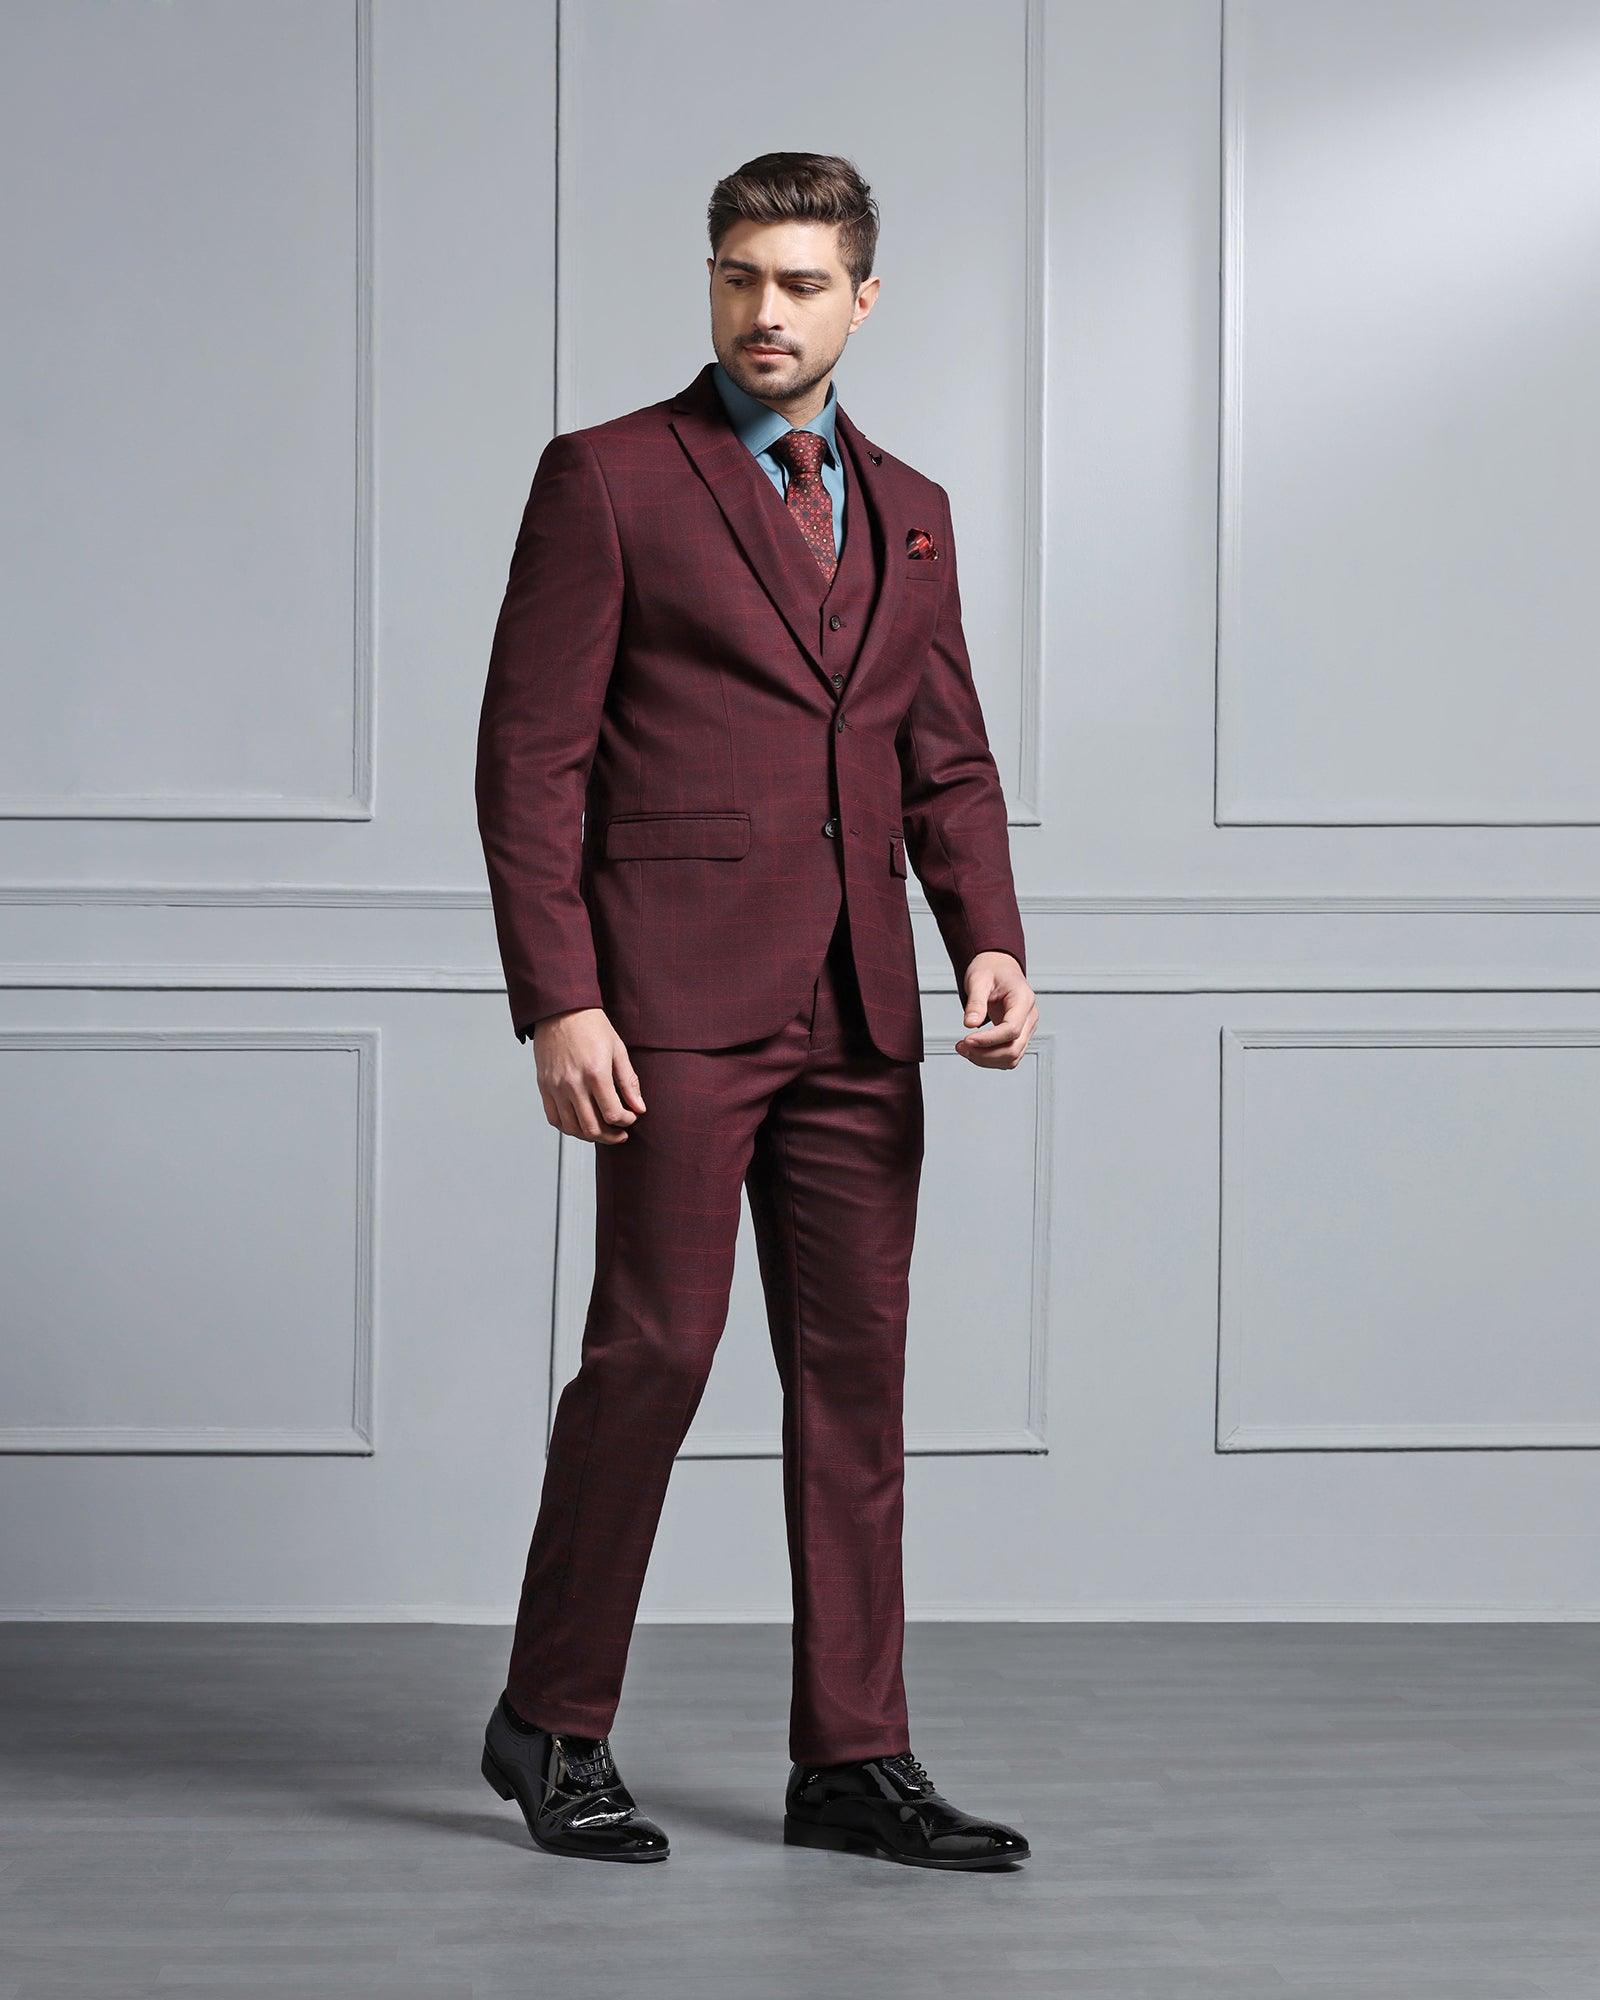 Three Piece Maroon Check Formal Suit - Wester